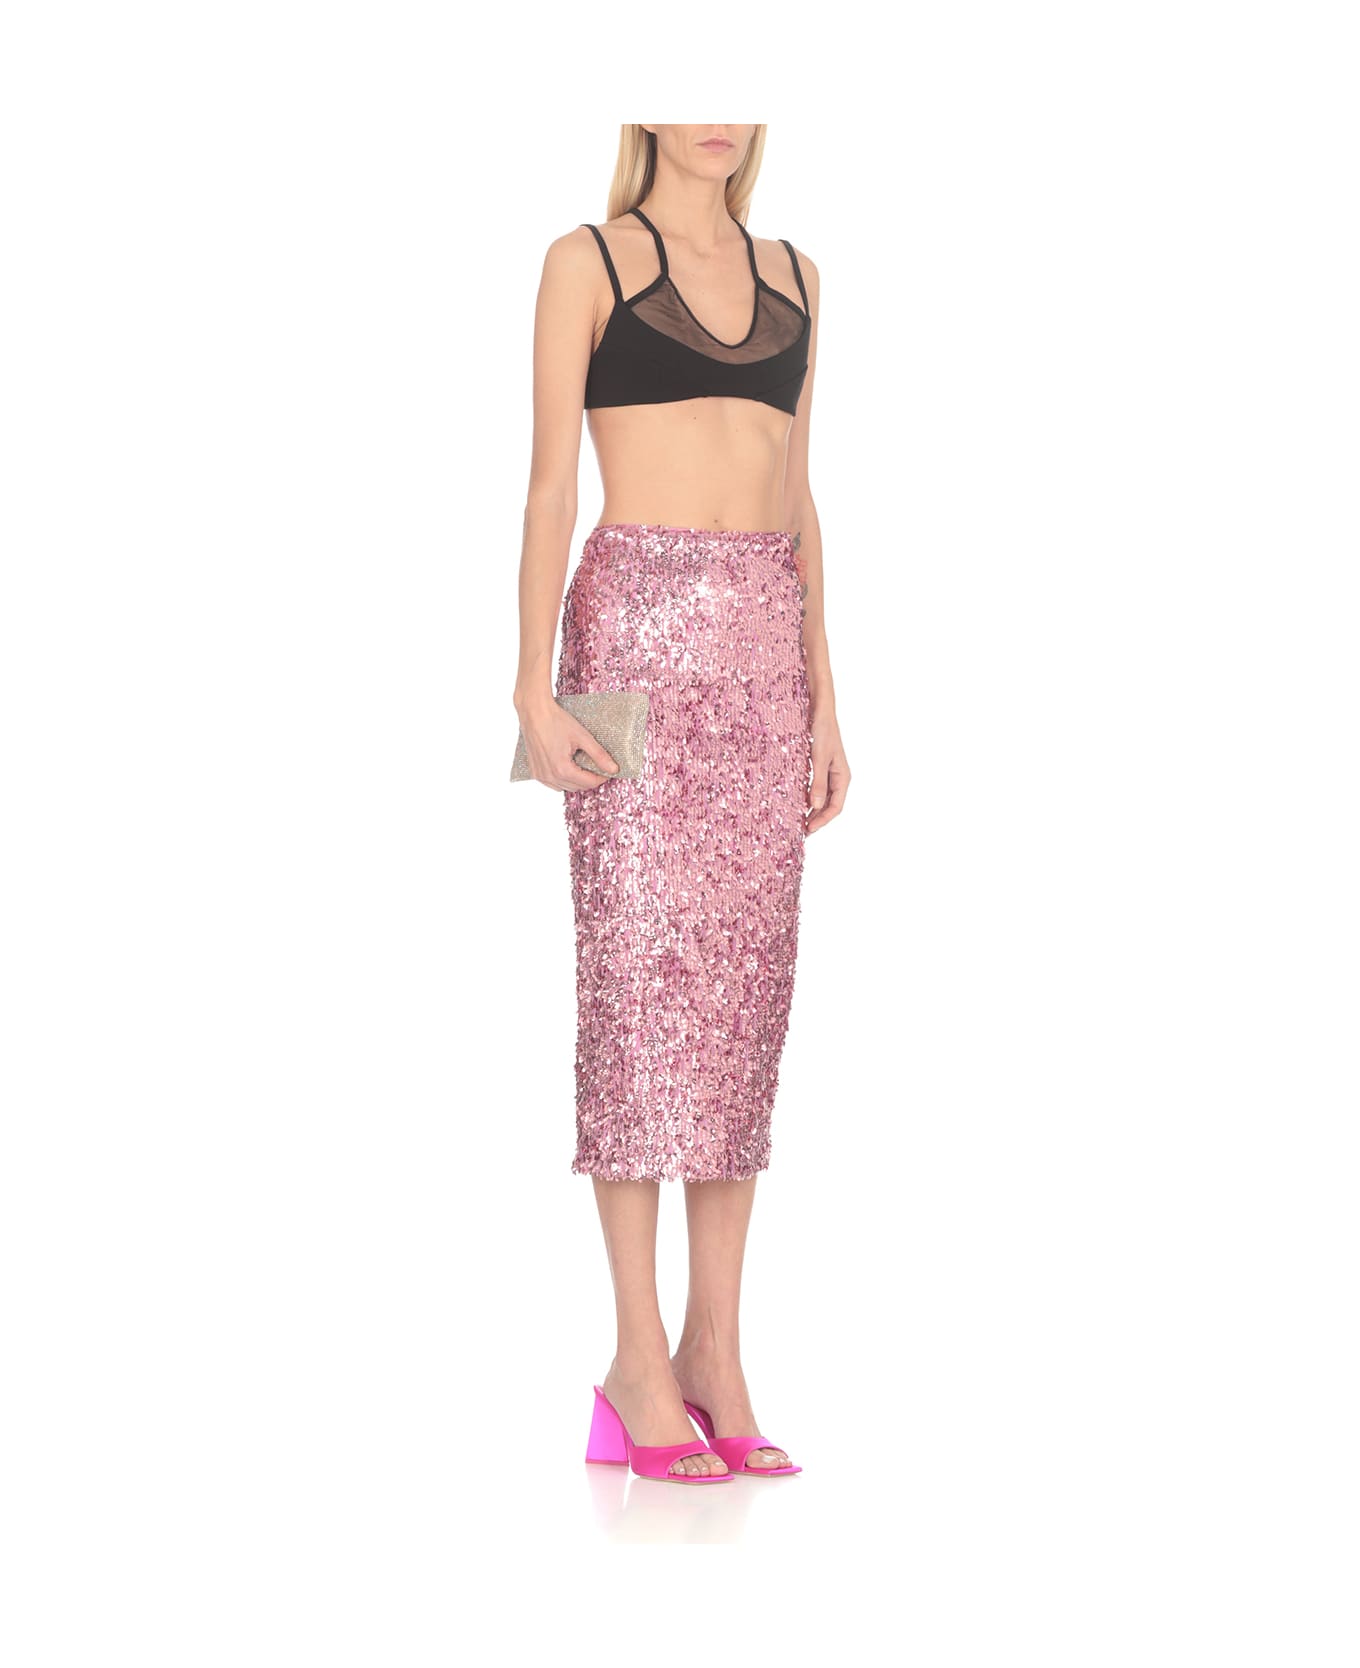 Rotate by Birger Christensen Skirt With Paillettes - Pink